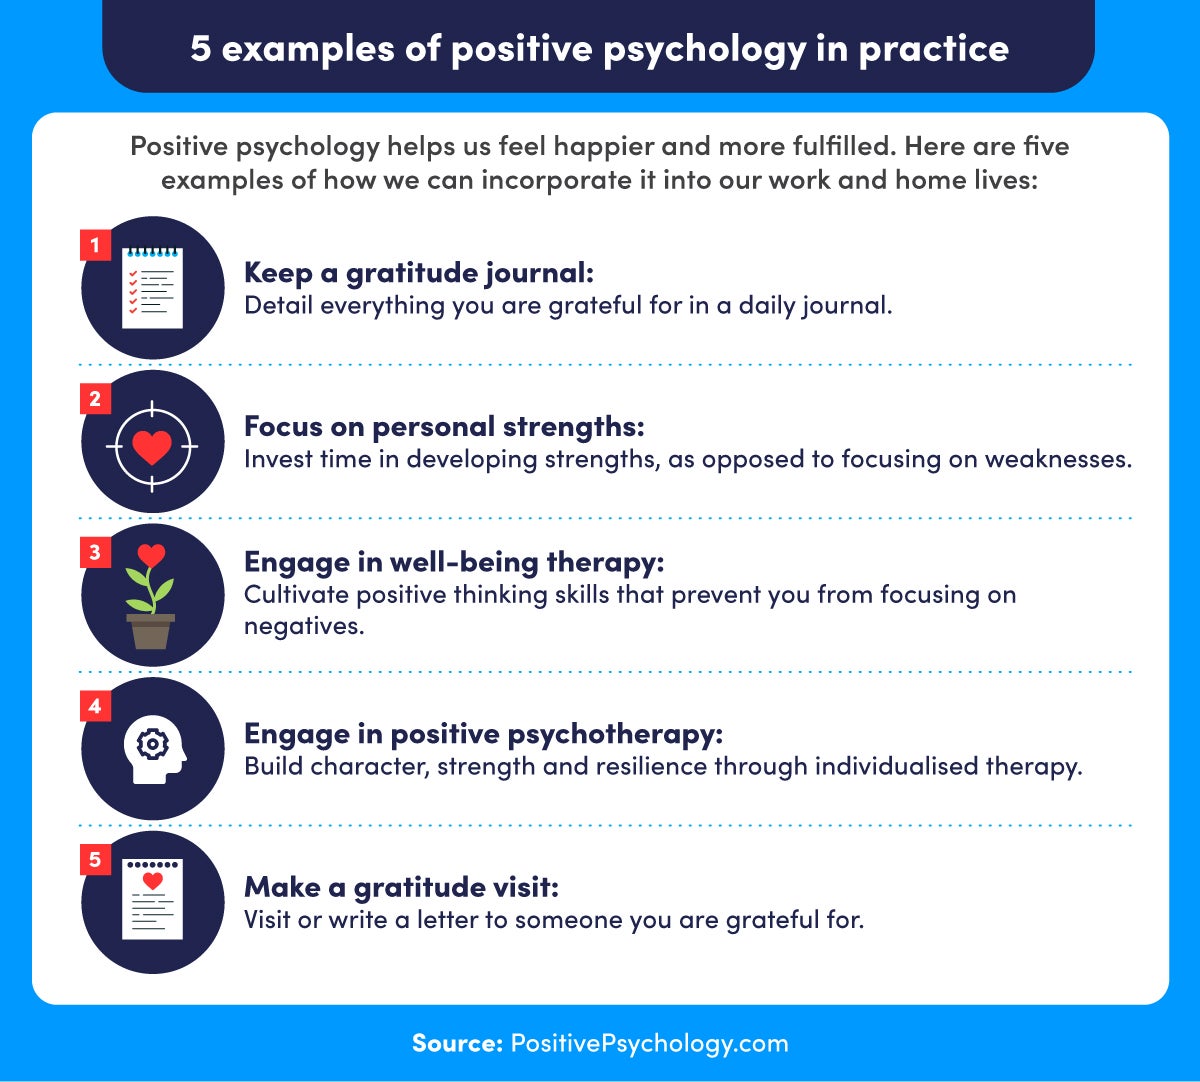 5 examples of positive psychology in practice